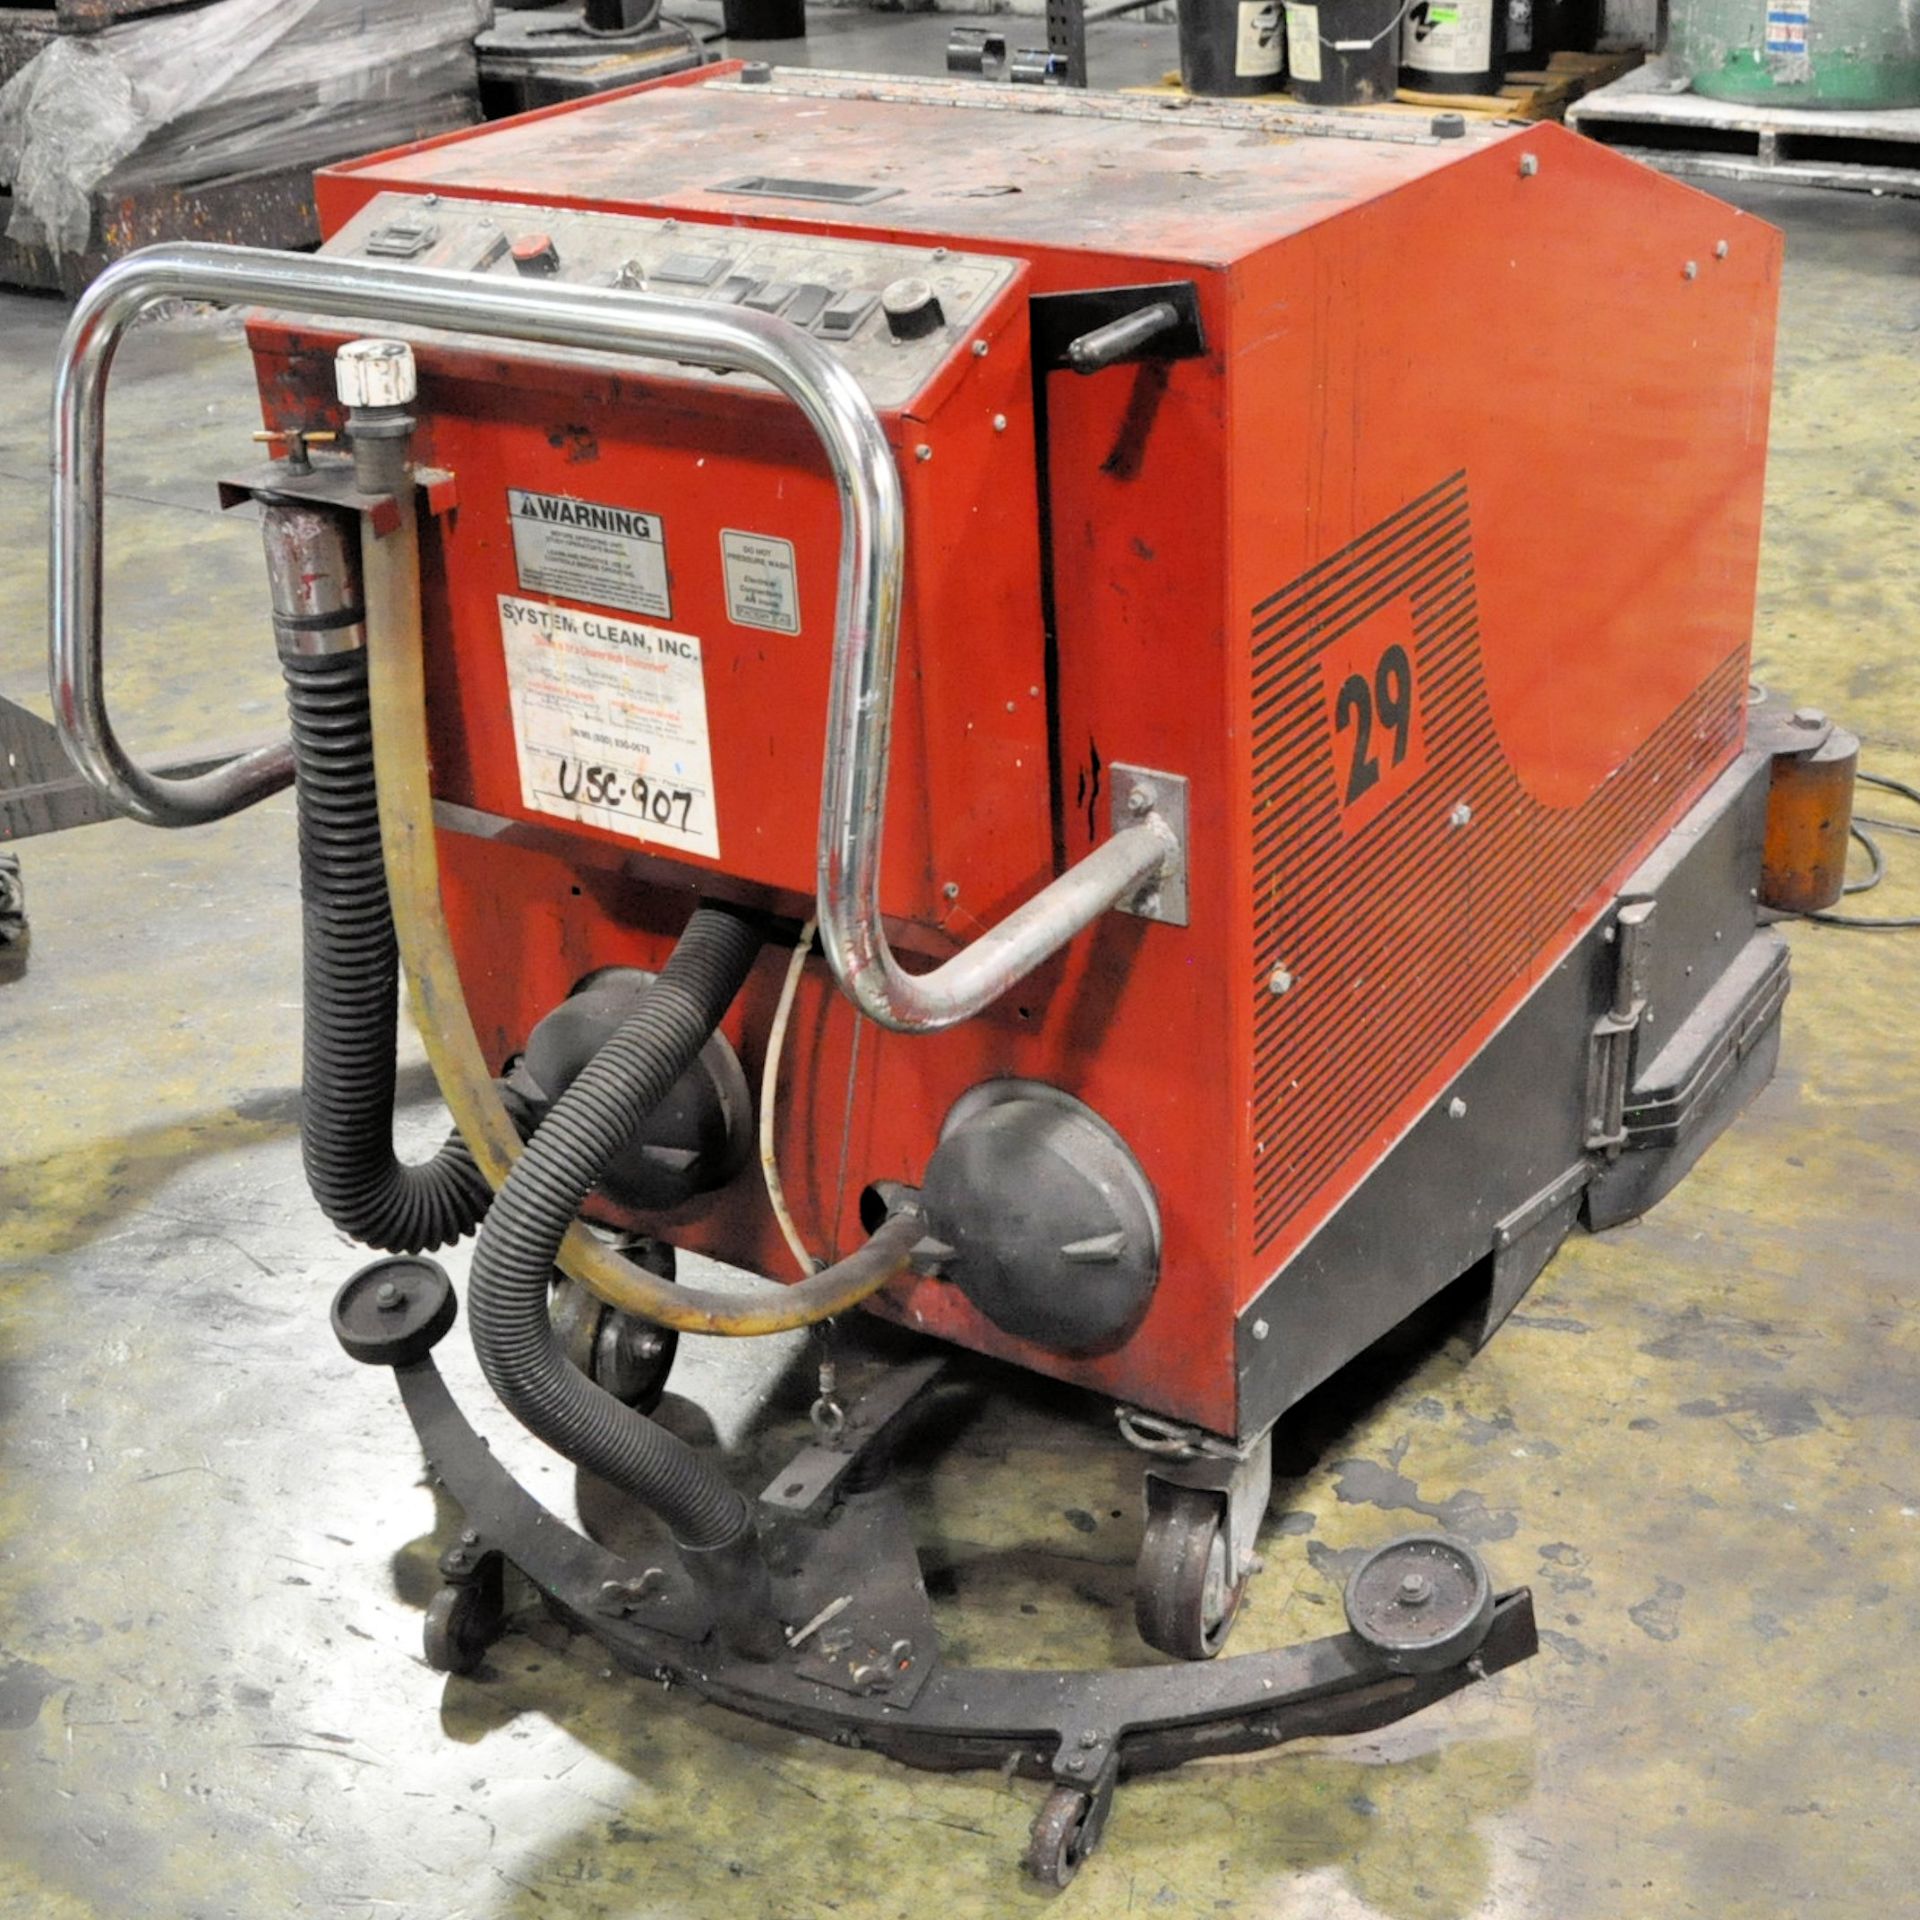 Factory Cat Model 29, Self Propelled Electric Walk Behind Floor Scrubber Machine, S/n N/a, with - Image 2 of 4